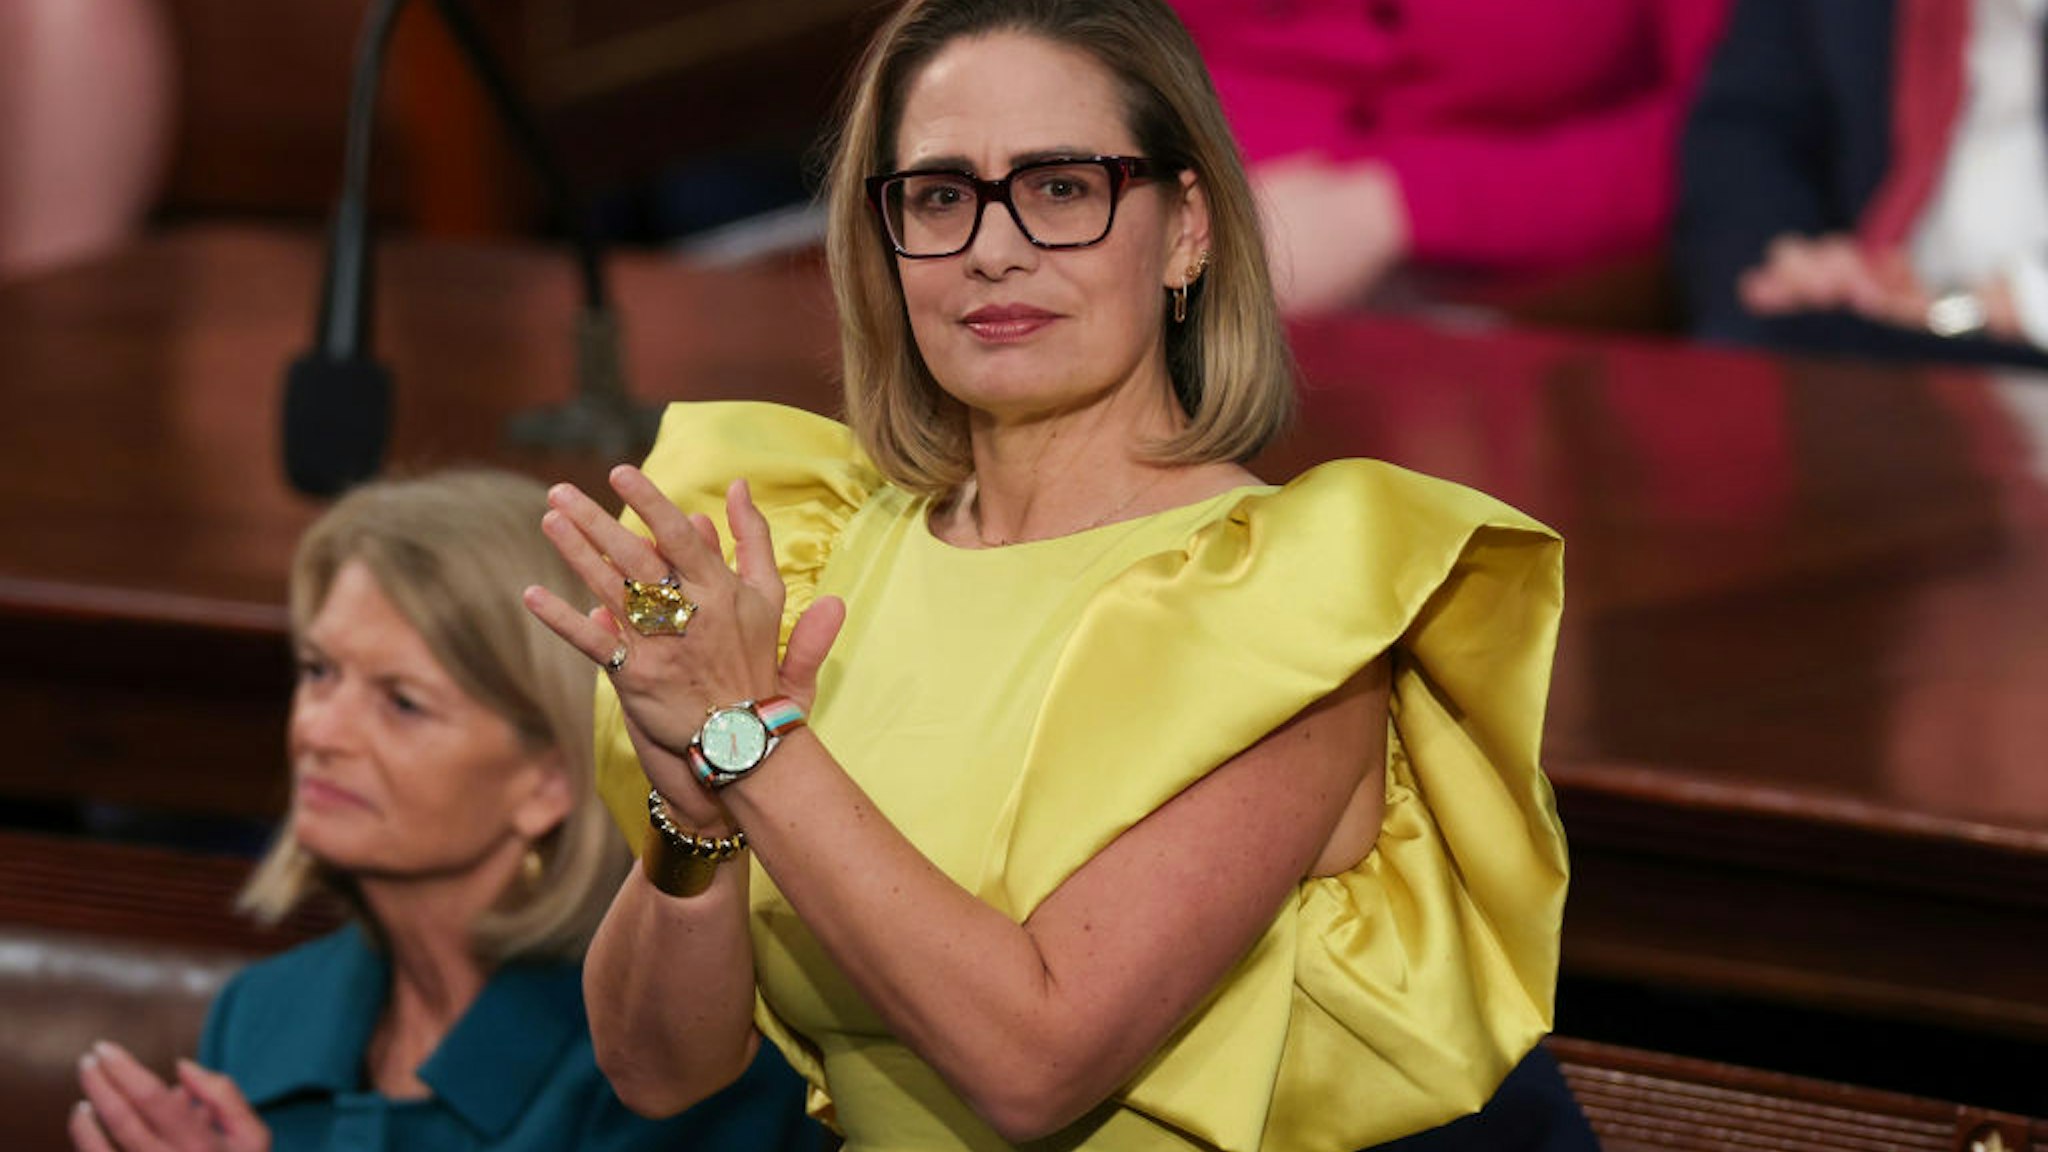 WASHINGTON, DC - FEBRUARY 07: U.S. Sen. Kyrsten Sinema (I-AZ) applauds during U.S. President Joe Biden's State of the Union address during a joint meeting of Congress in the House Chamber of the U.S. Capitol on February 07, 2023 in Washington, DC. The speech marks Biden's first address to the new Republican-controlled House. (Photo by Win McNamee/Getty Images)